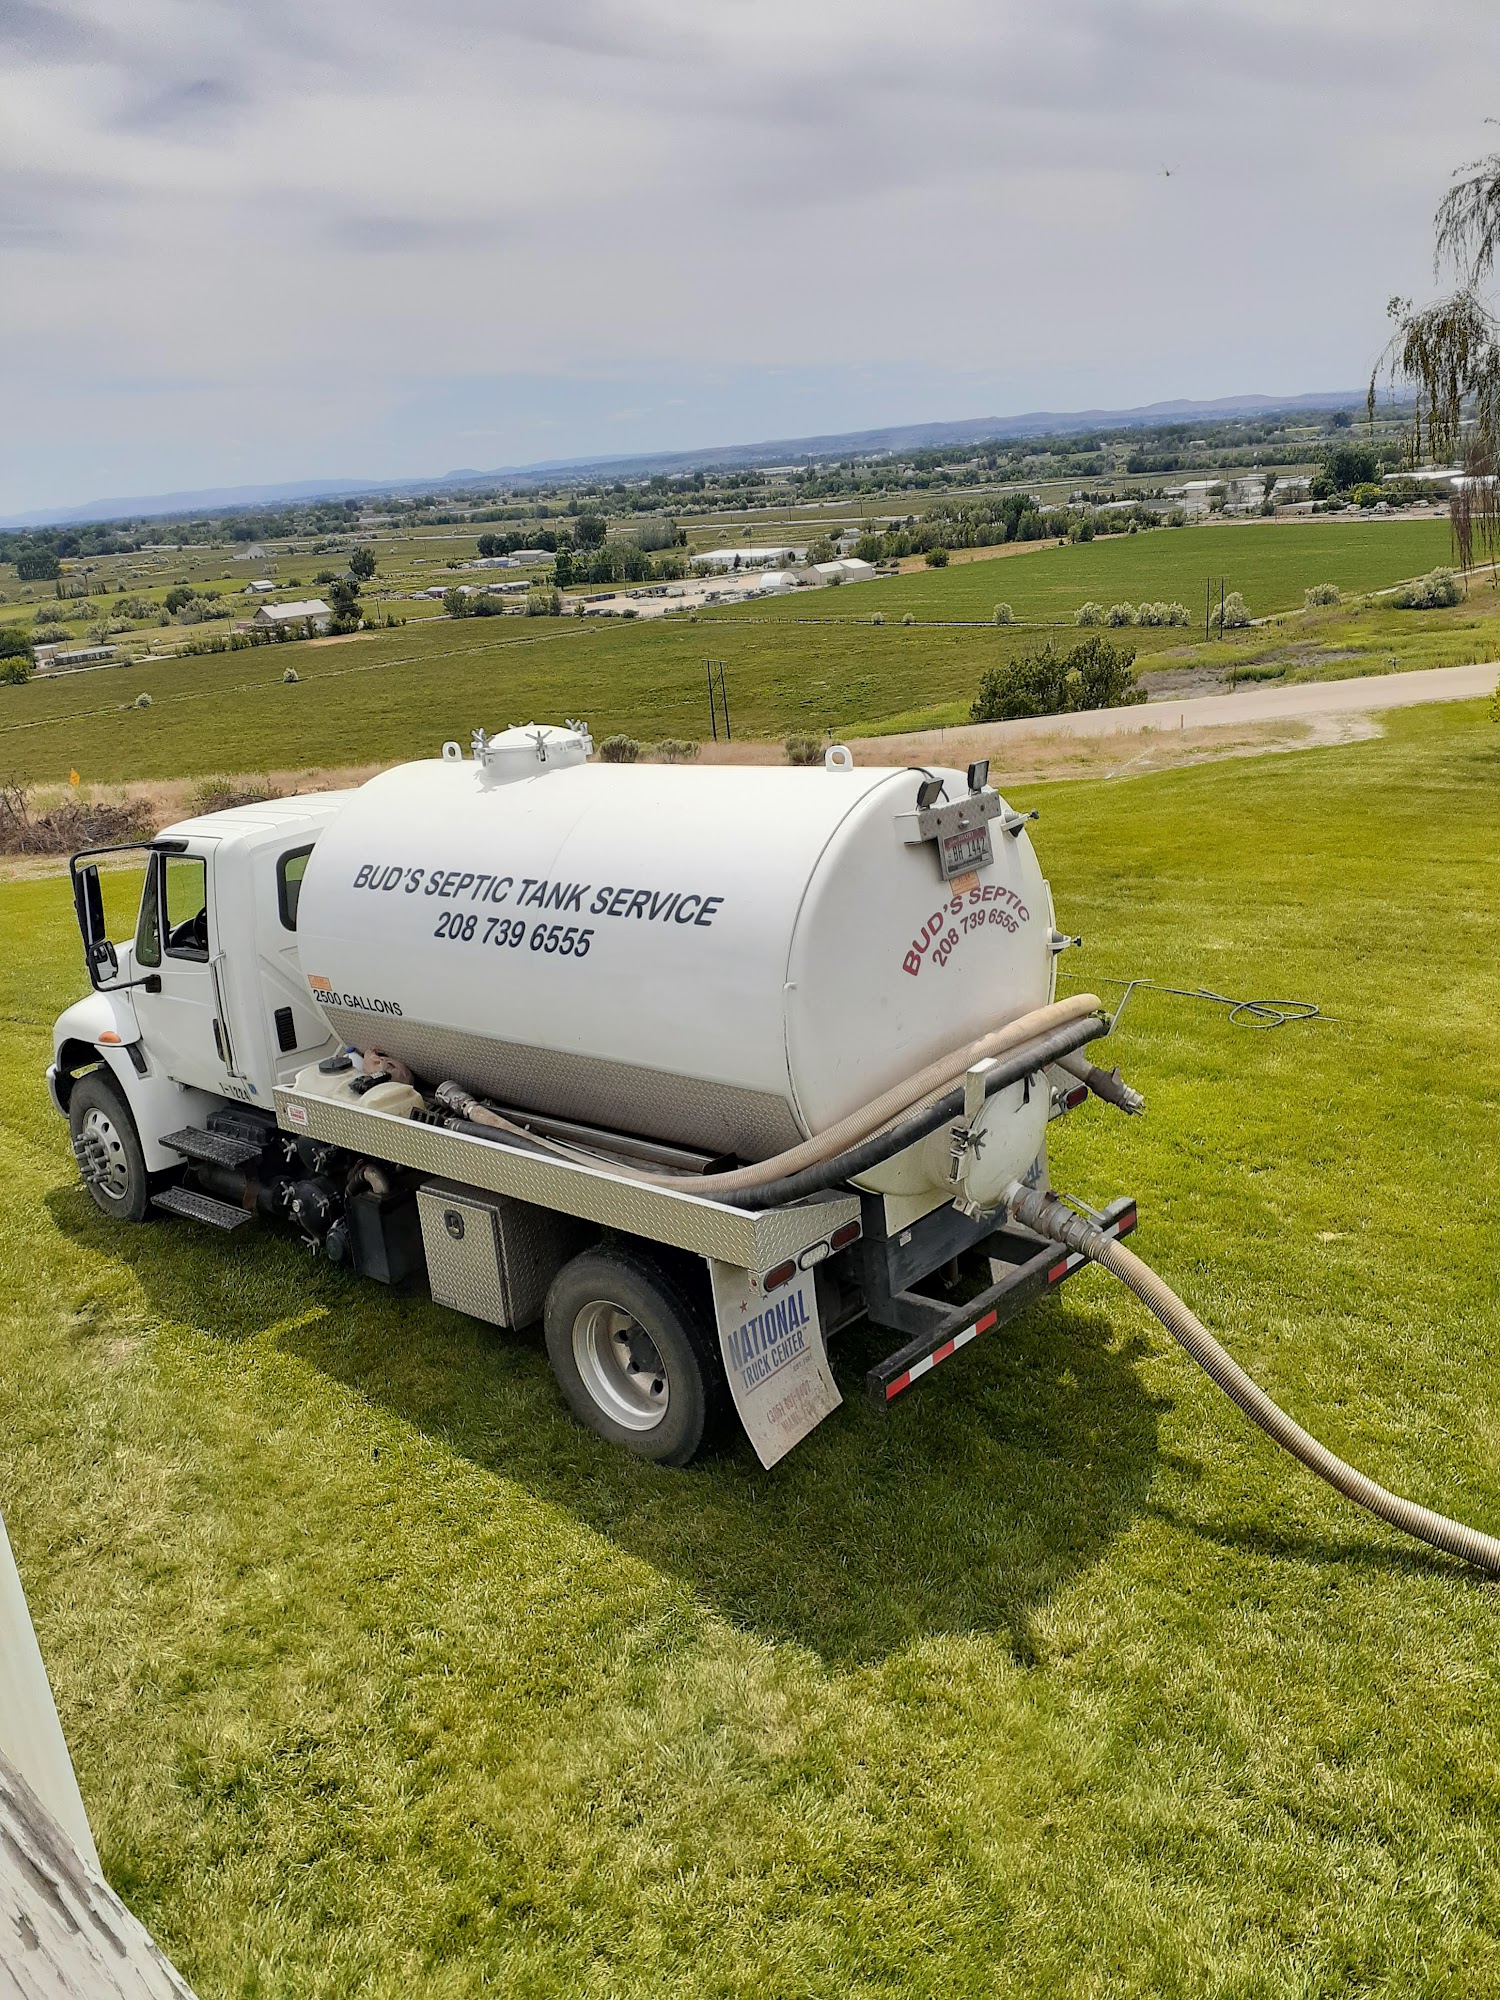 Bud's Septic Tank Services 9000 Washoe Rd, Payette Idaho 83661